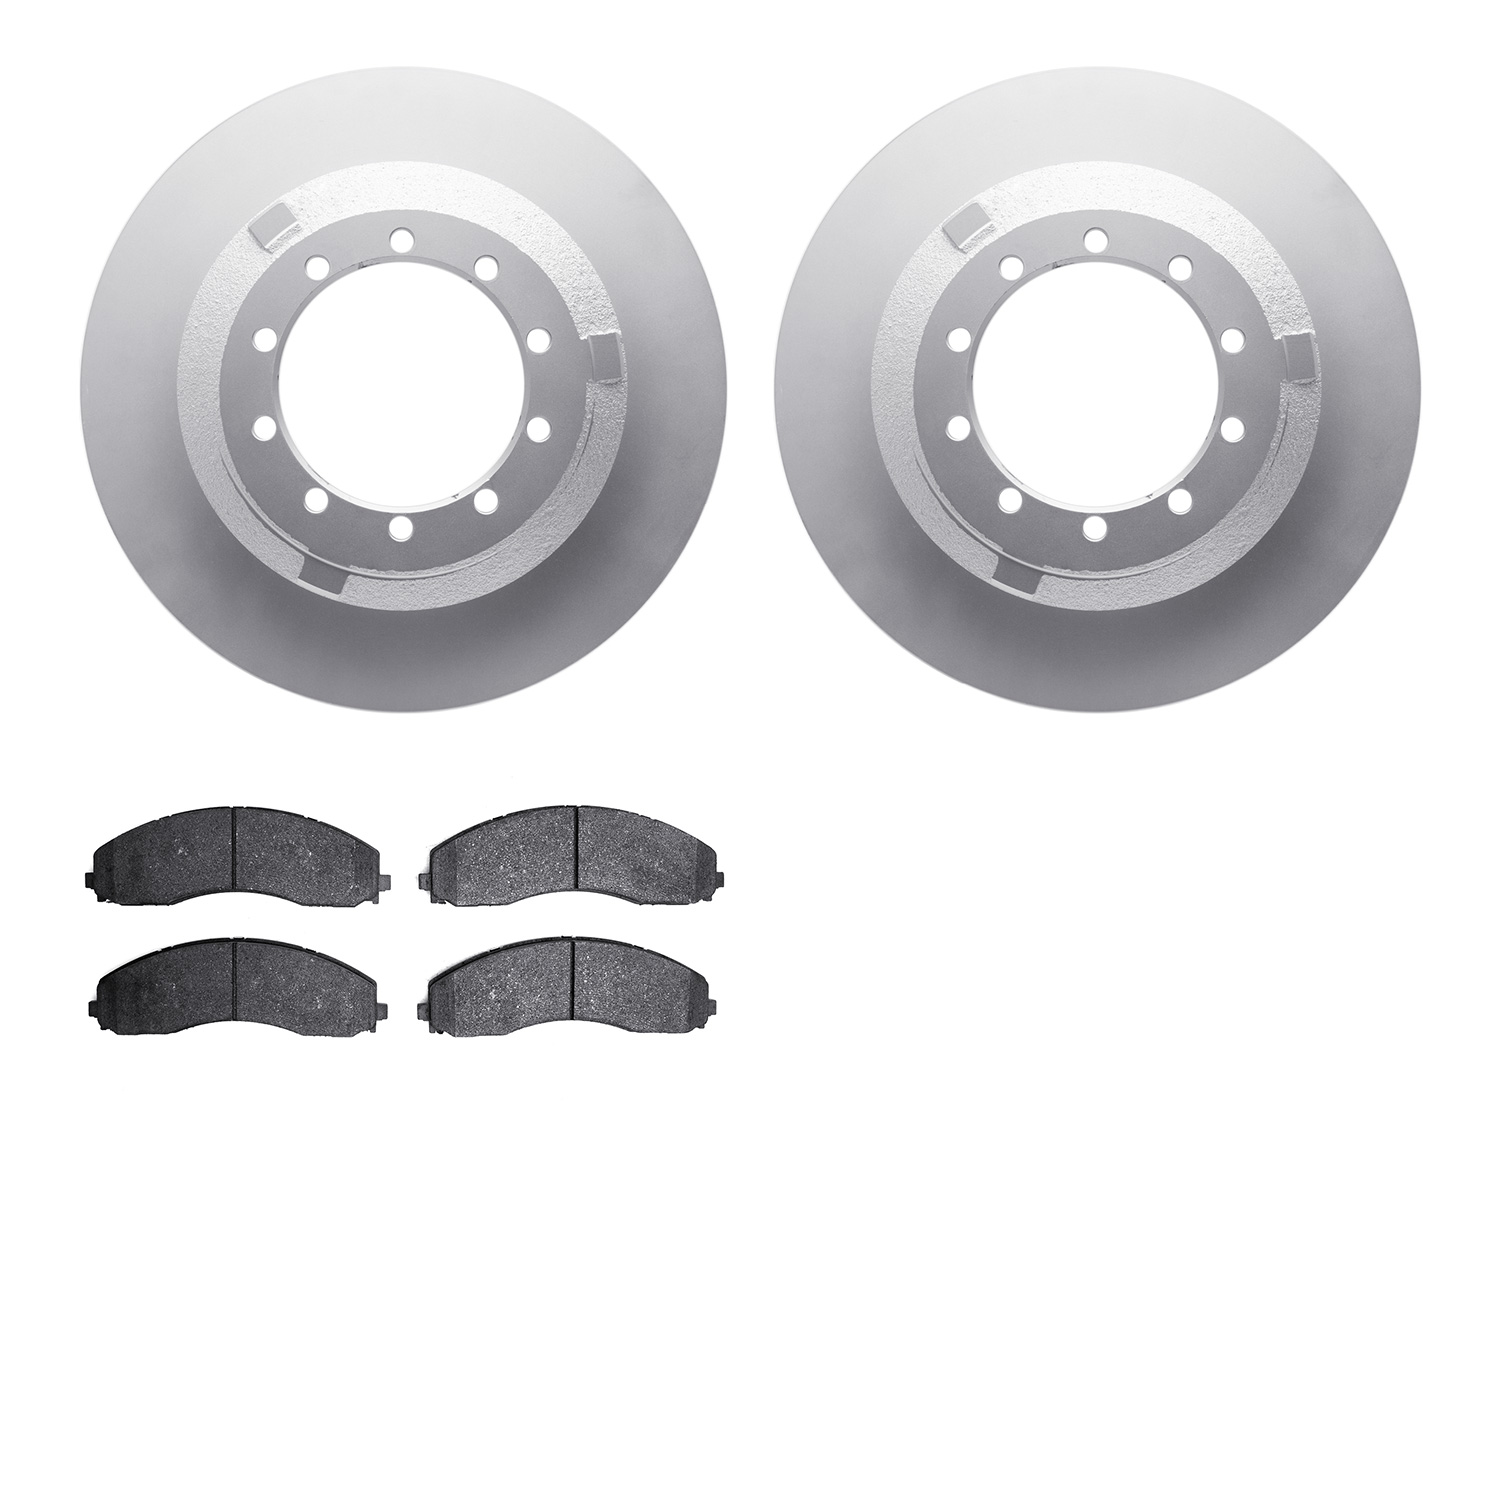 4402-54078 Geospec Brake Rotors with Ultimate-Duty Brake Pads Kit, Fits Select Ford/Lincoln/Mercury/Mazda, Position: Rear